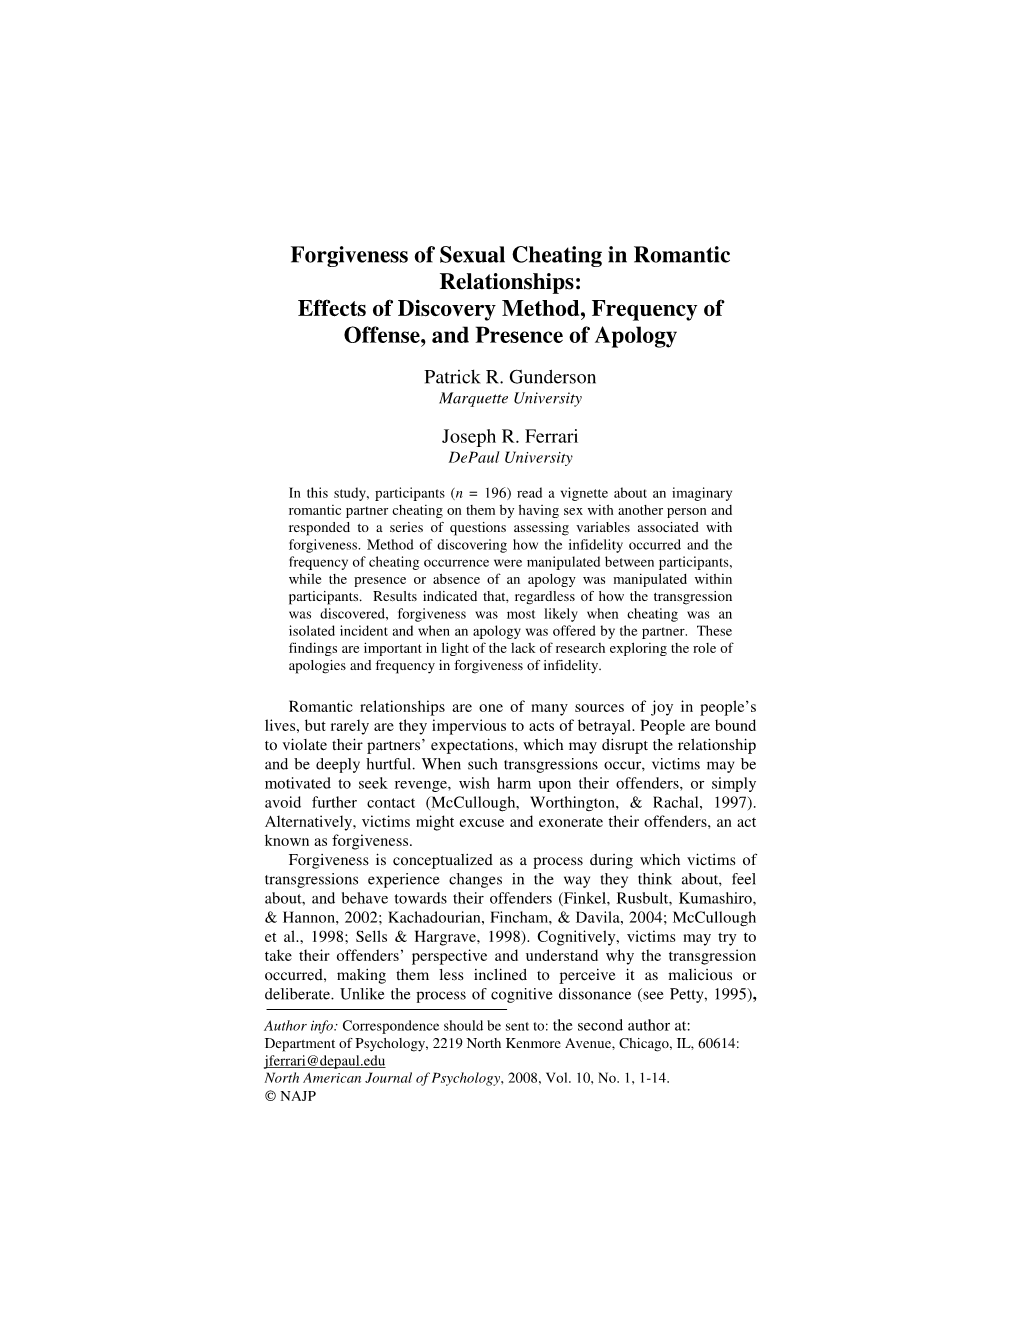 Forgiveness of Sexual Cheating in Romantic Relationships: Effects of Discovery Method, Frequency of Offense, and Presence of Apology